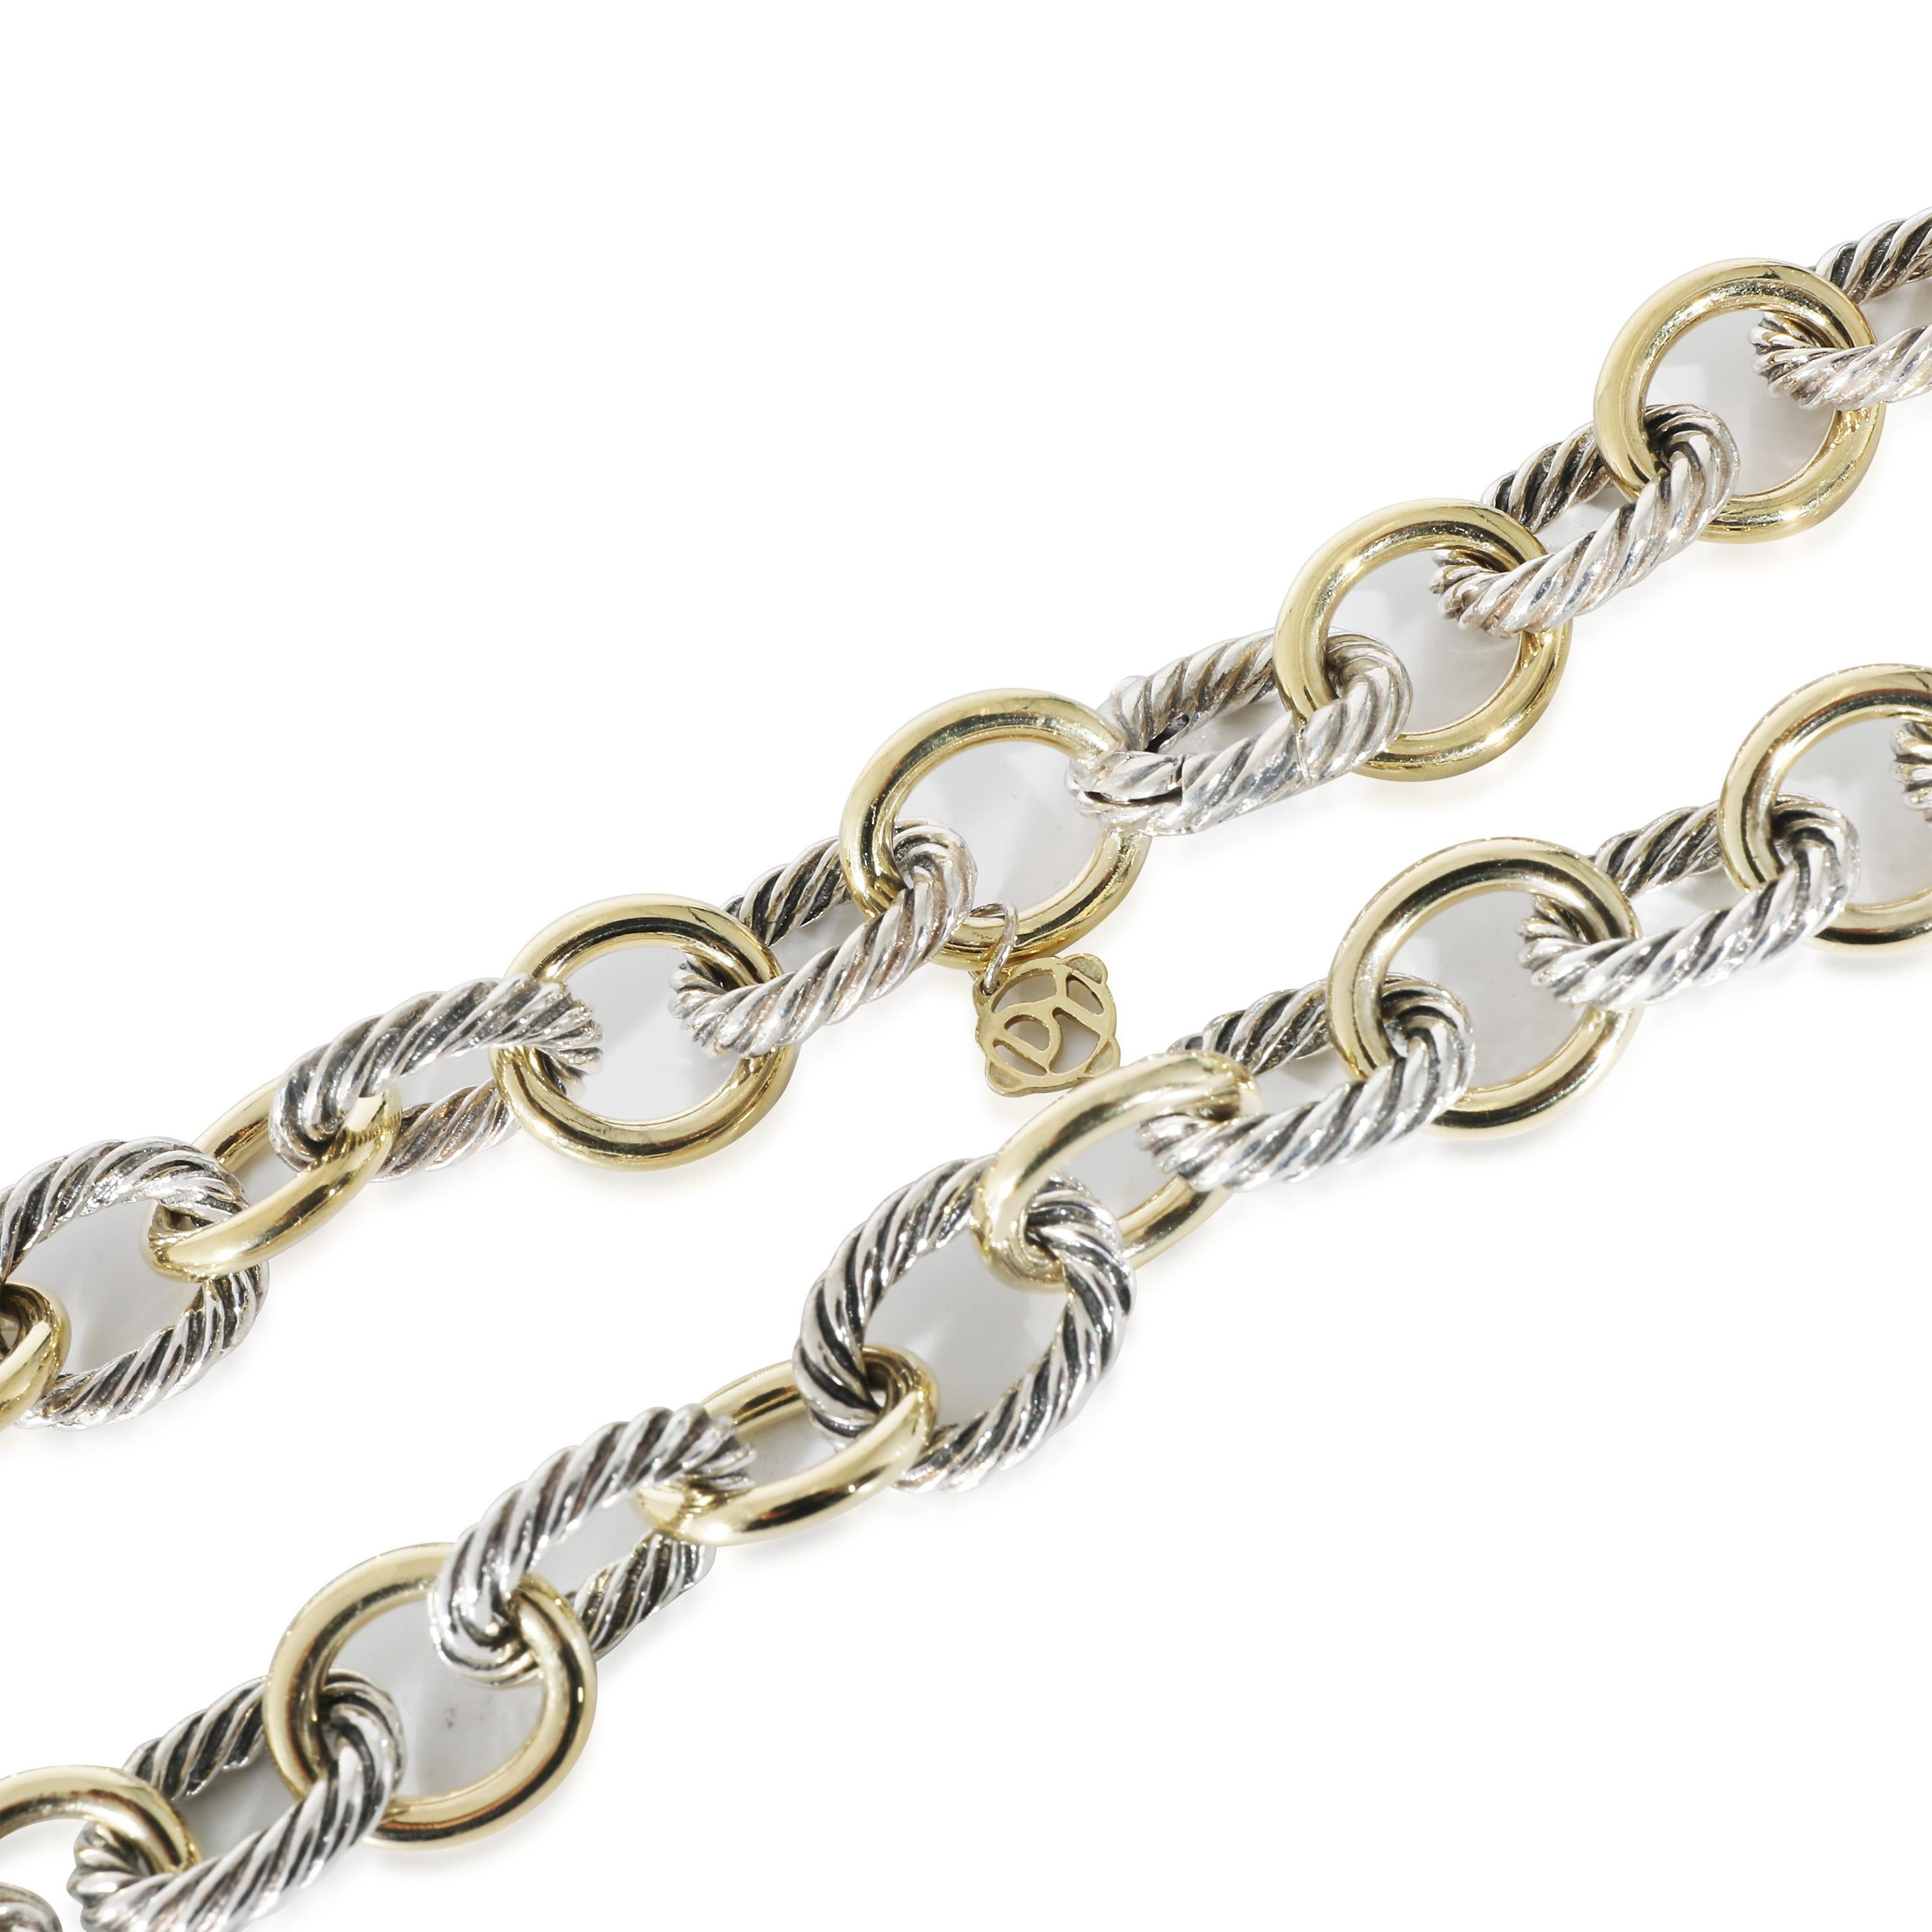 Women's or Men's David Yurman Large Oval Link Necklace in 18K Yellow Gold/Sterling Silver